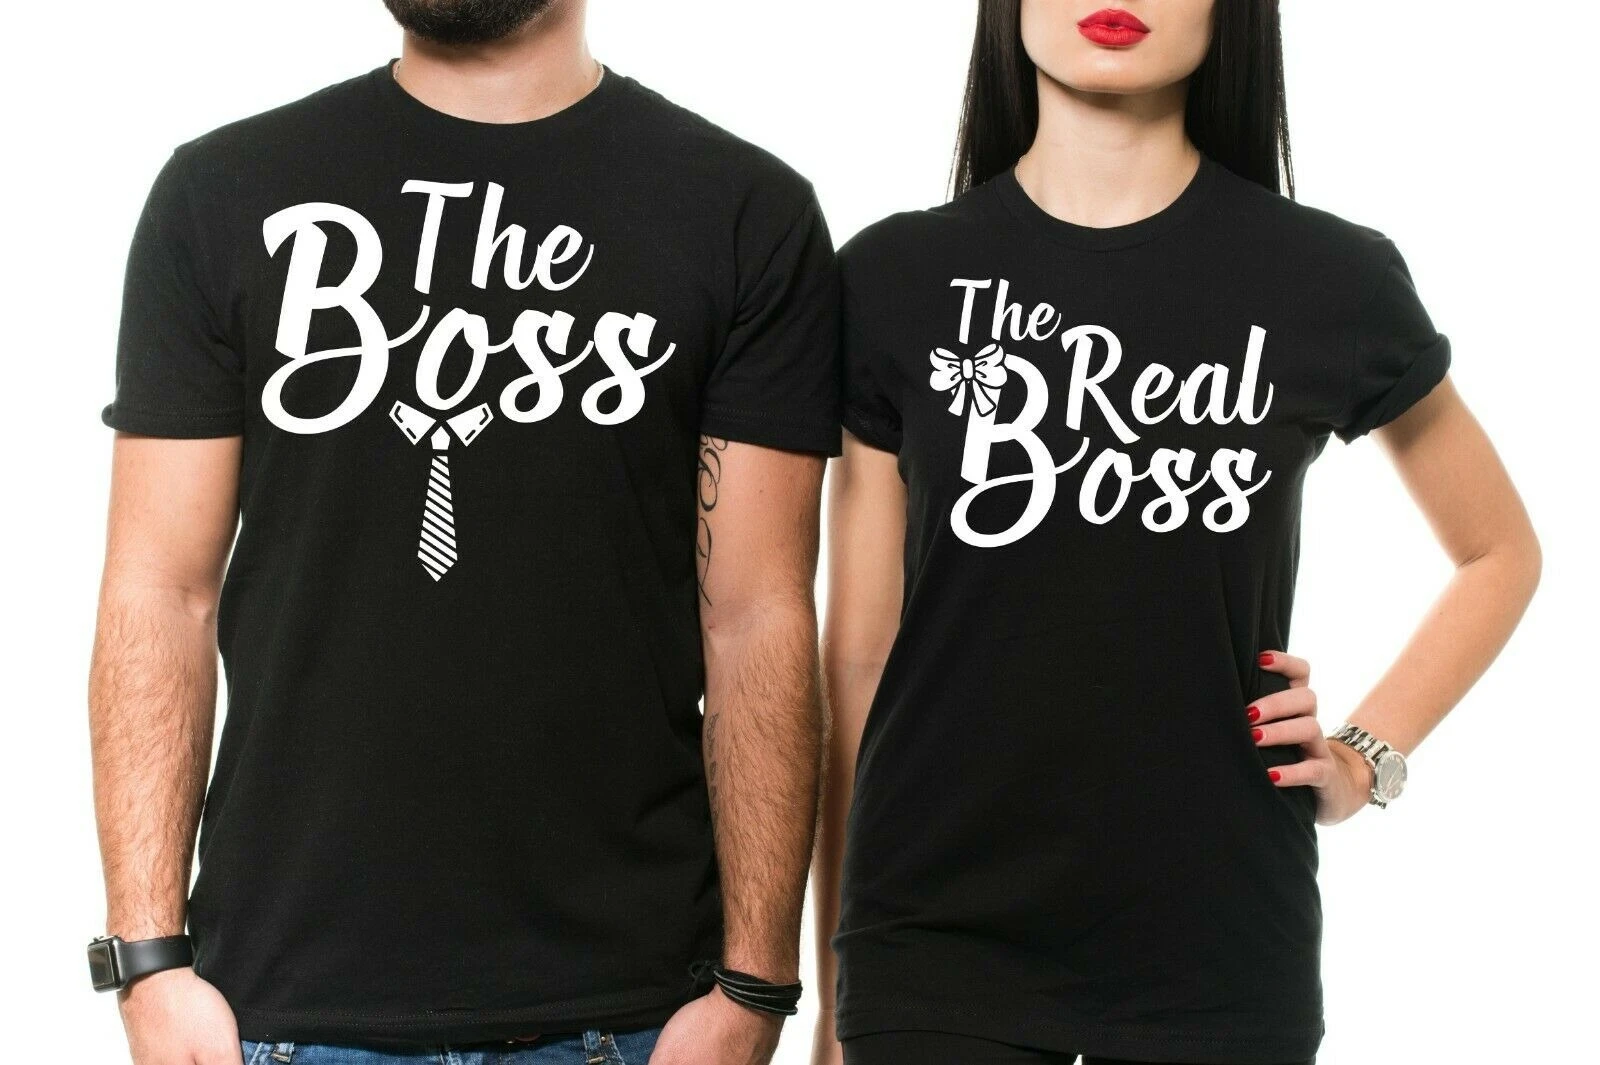 the boss and the real boss shirts